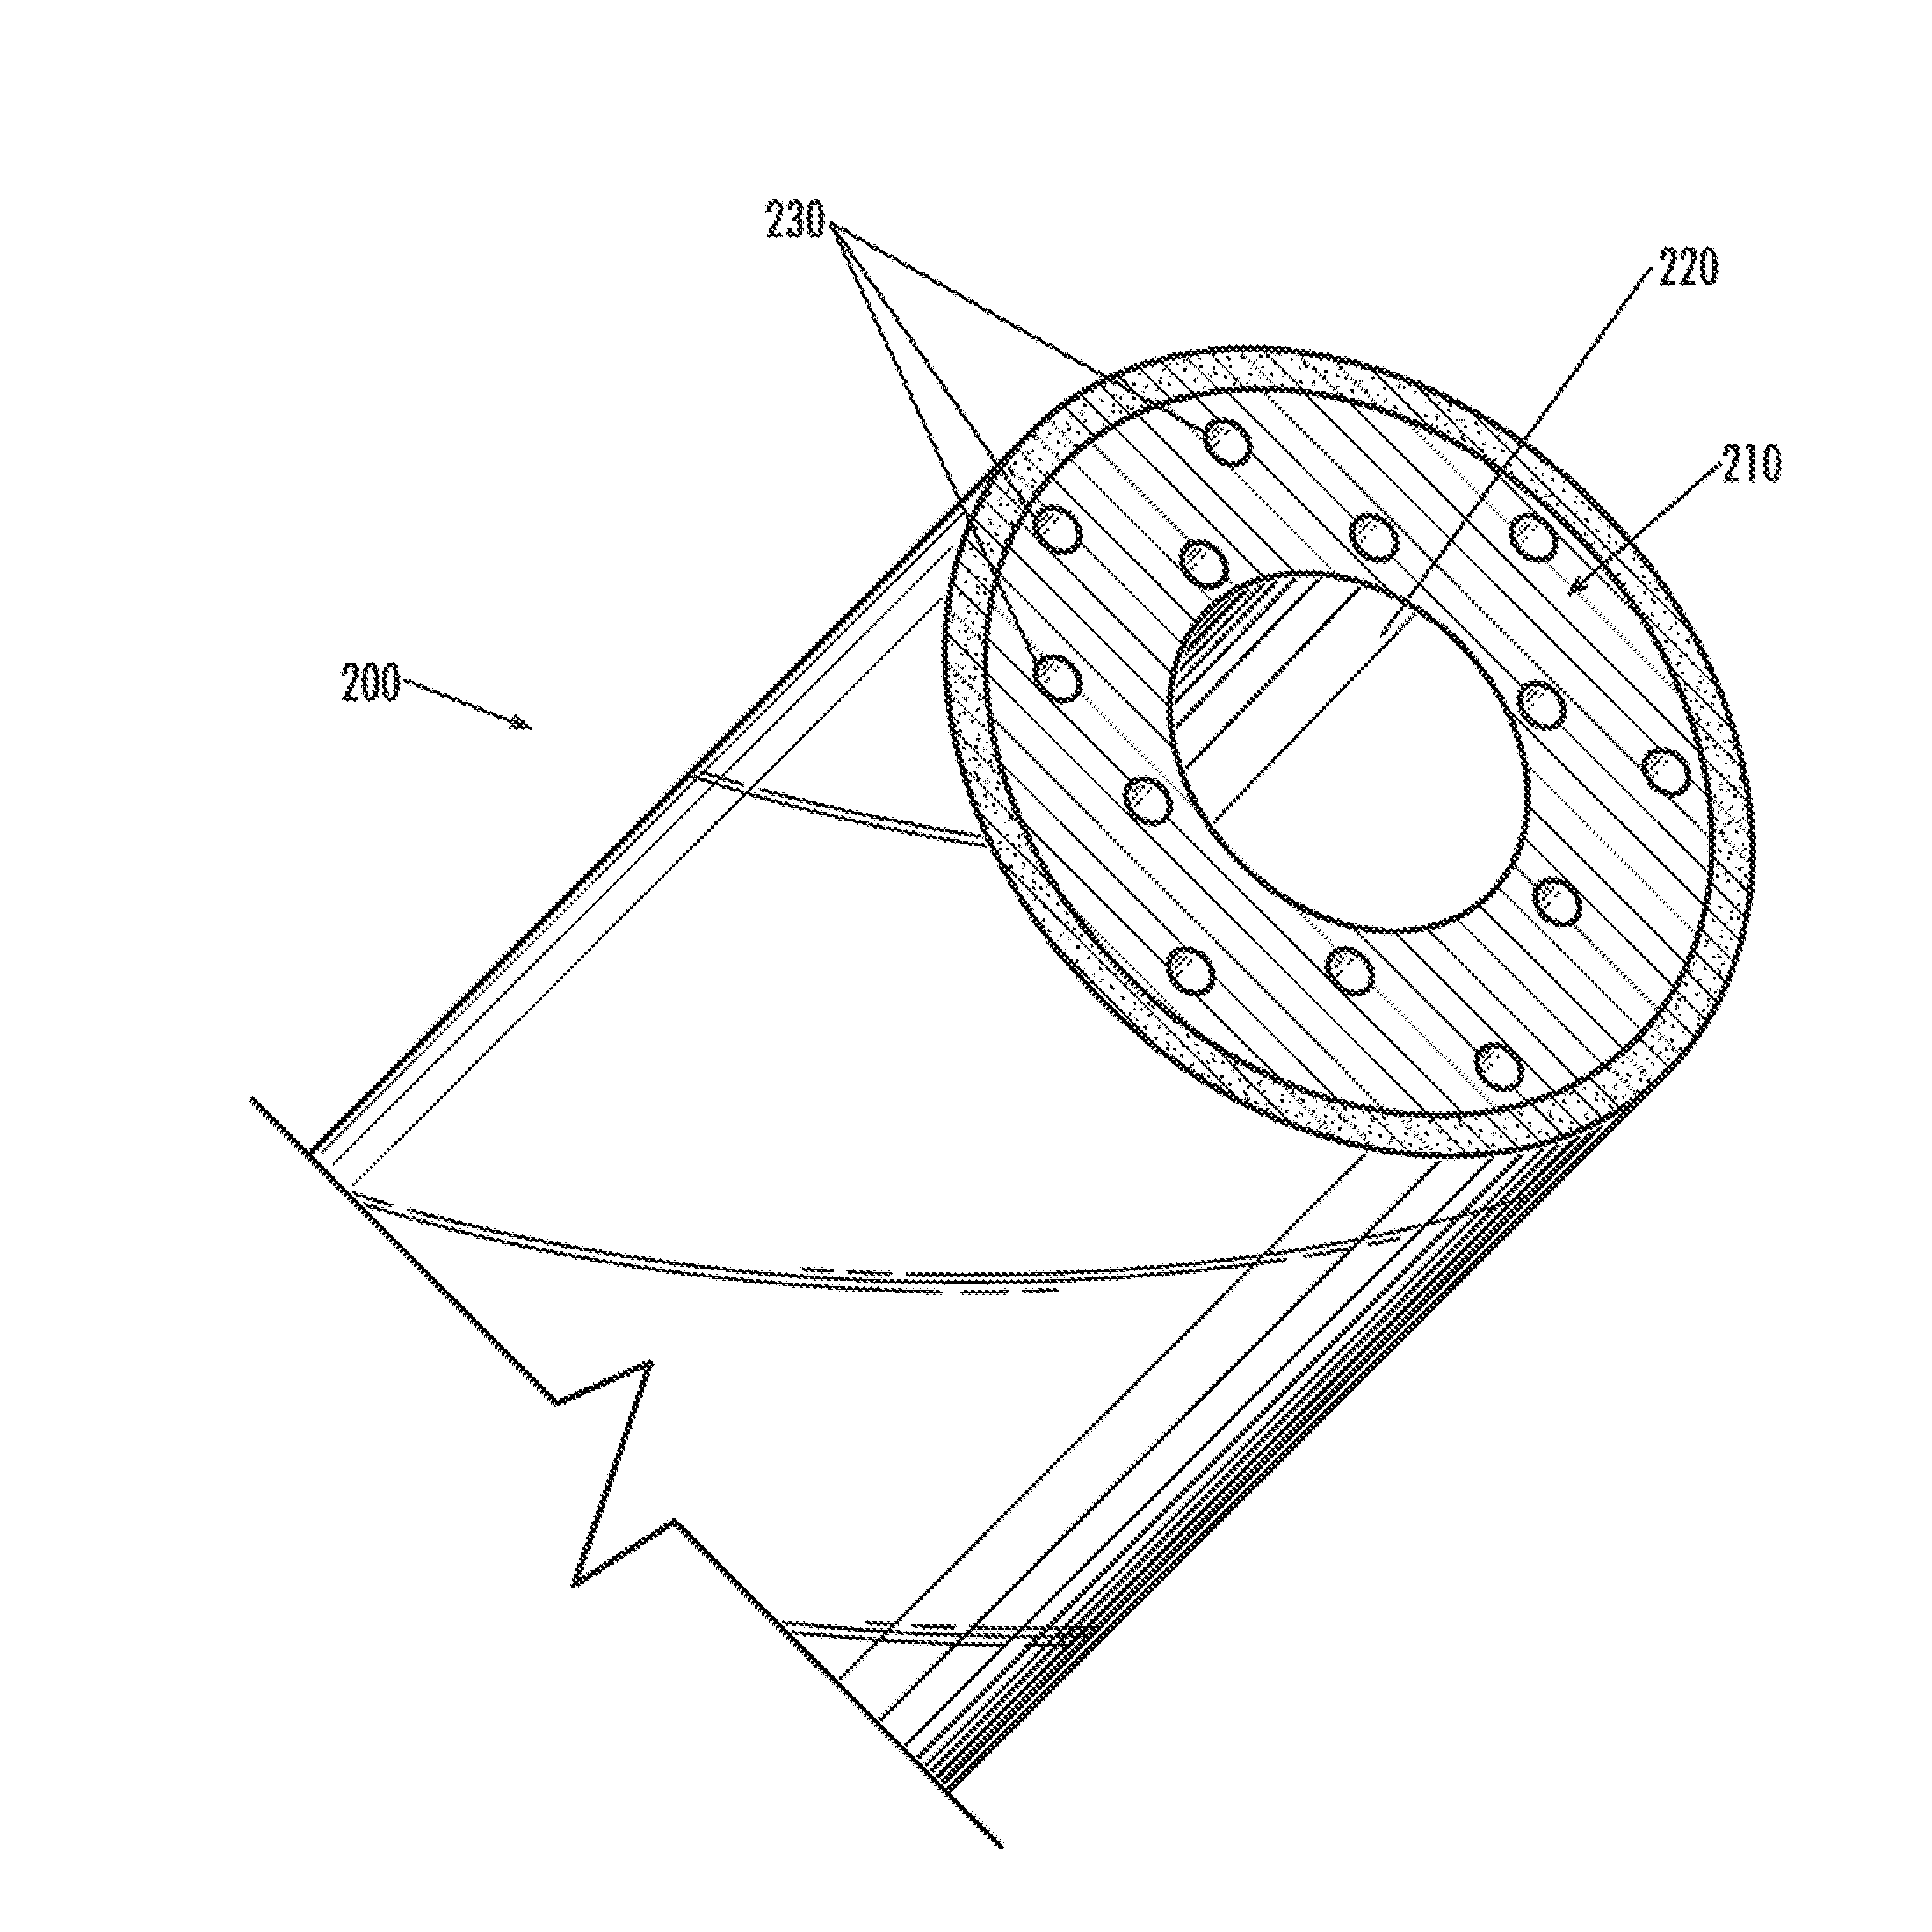 Intravascular Cerebral Catheter Device and Method of Use